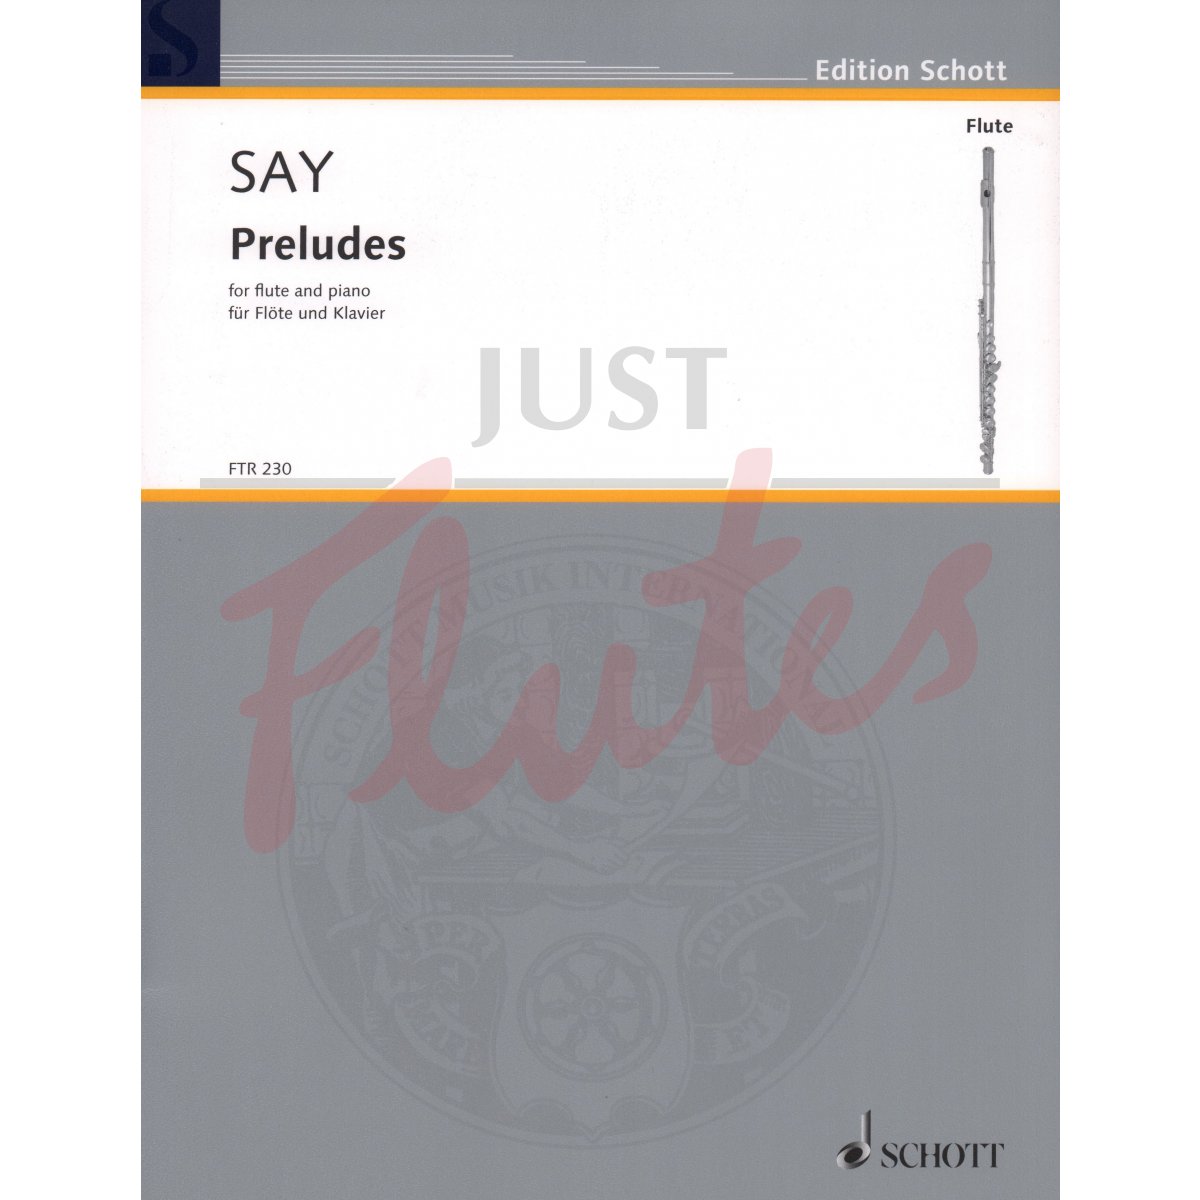 Preludes for Flute and Piano